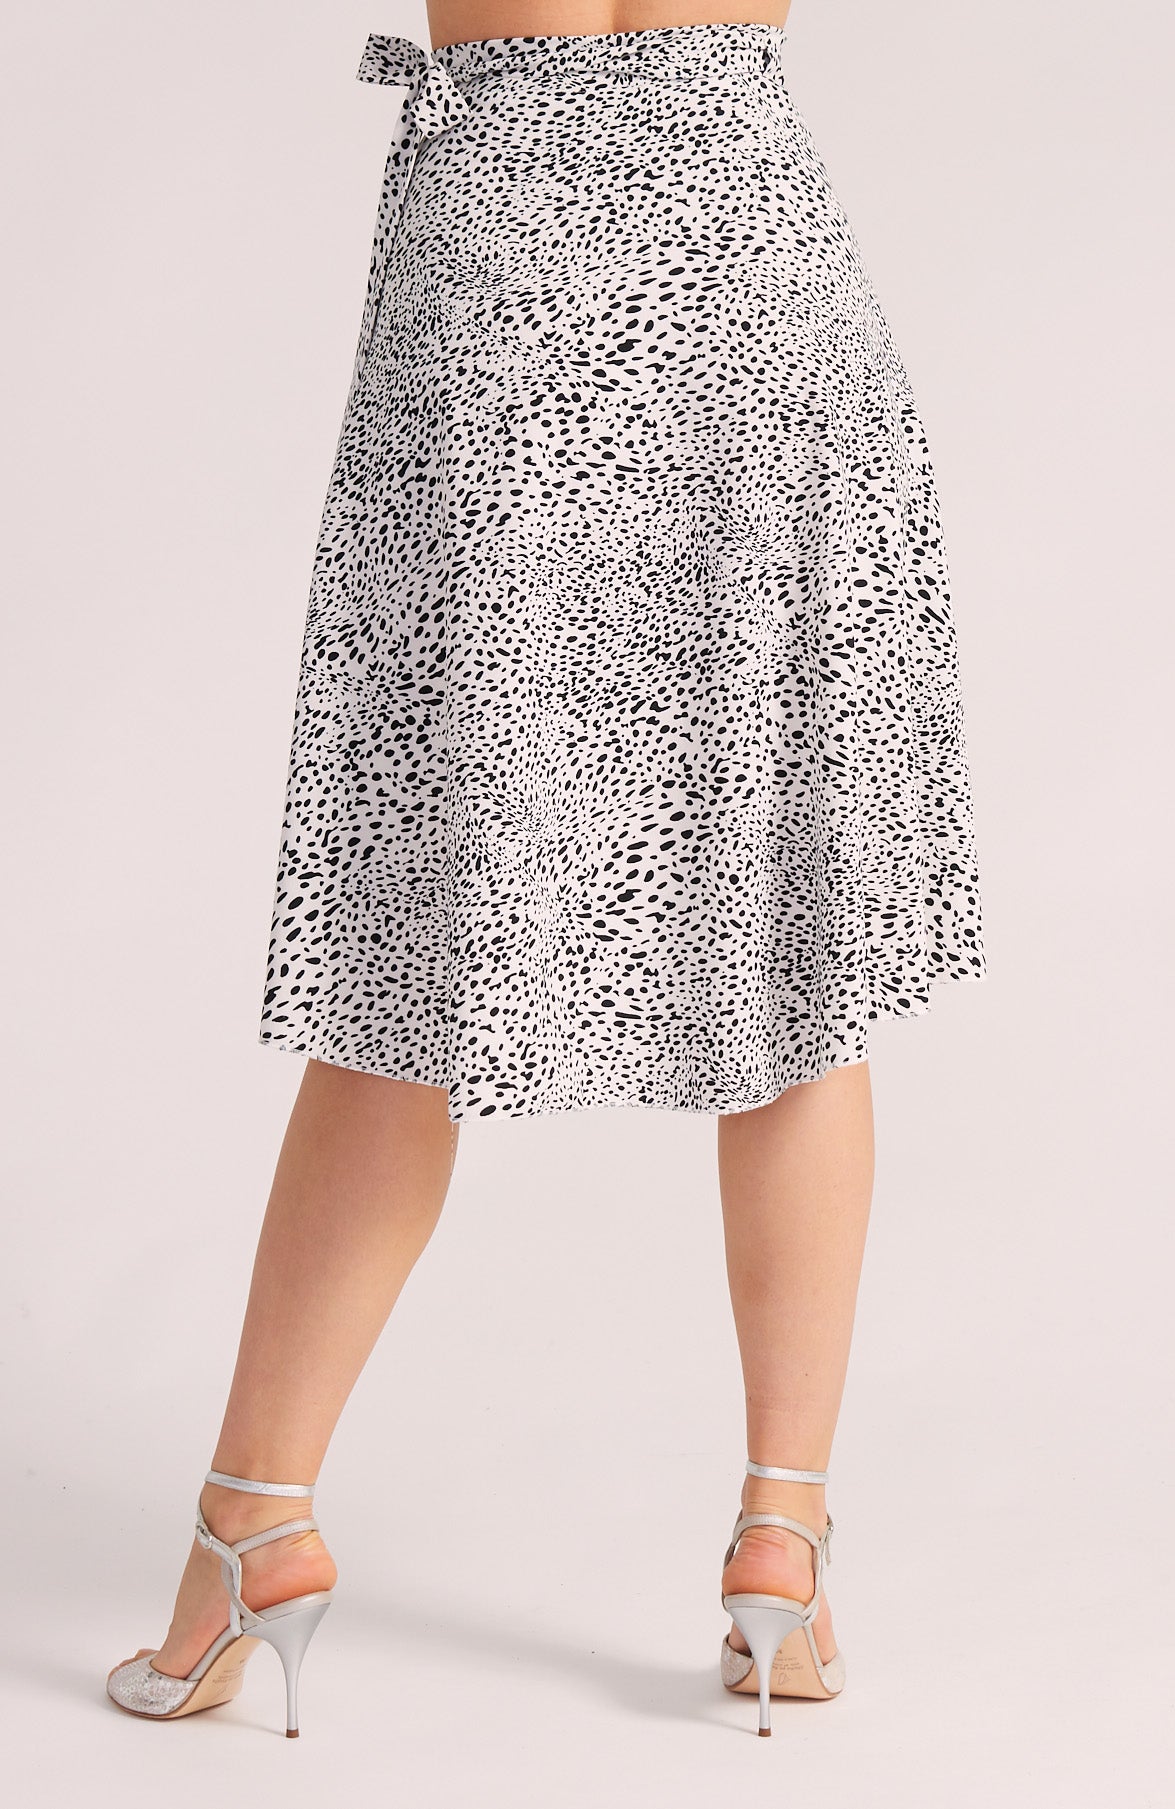 COCO - Dotted Wrap Skirt in Classic Black & White